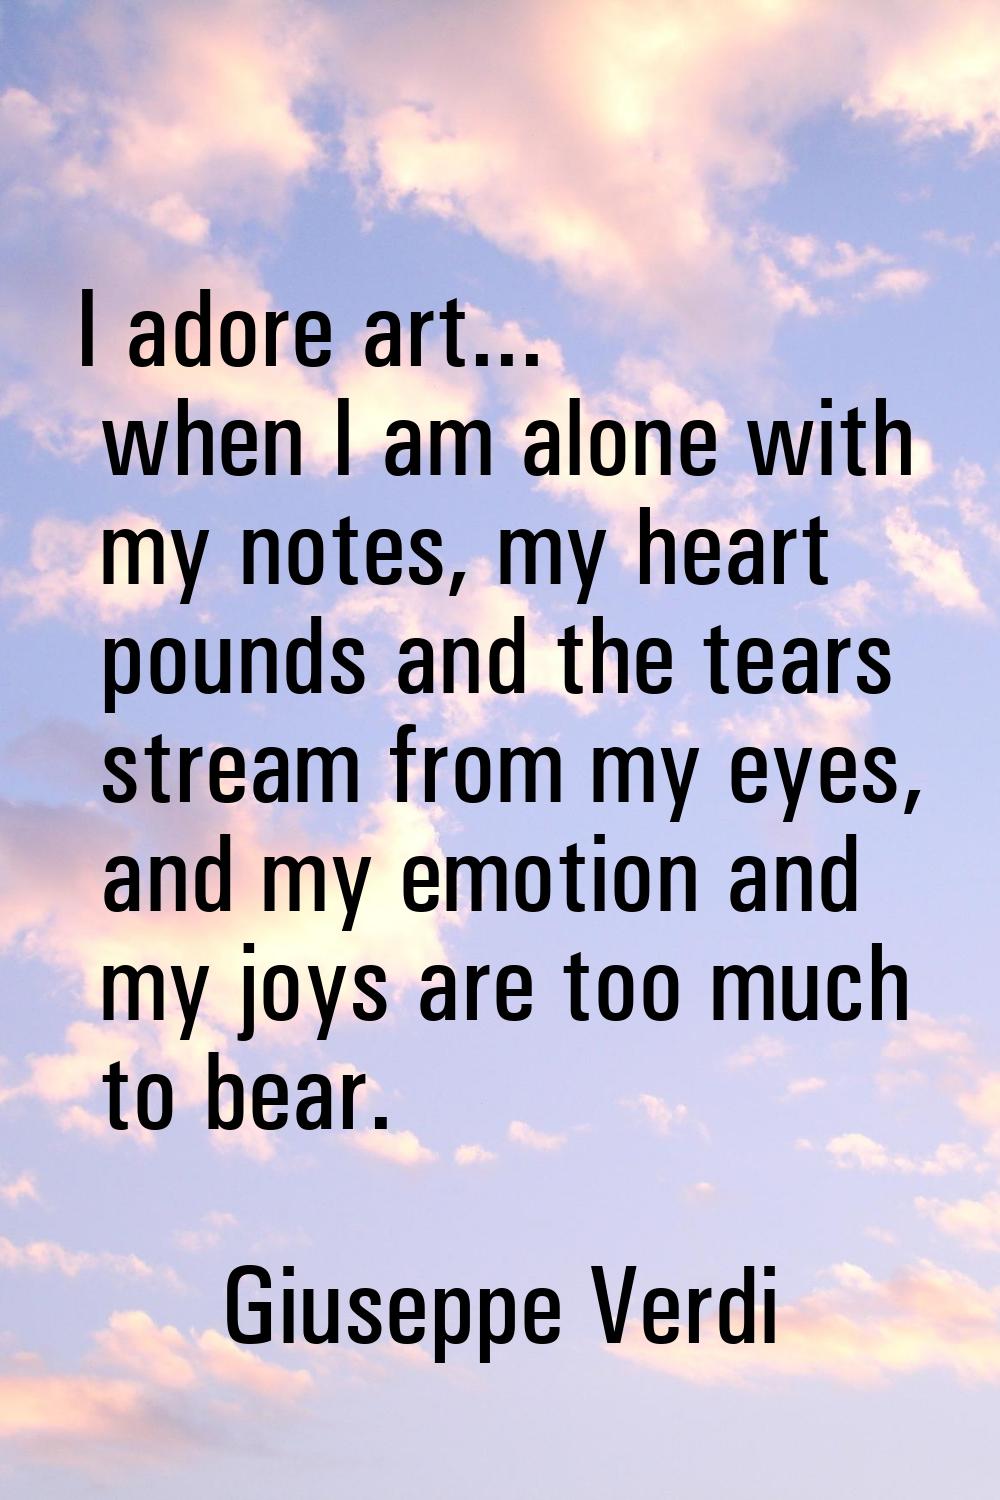 I adore art... when I am alone with my notes, my heart pounds and the tears stream from my eyes, an